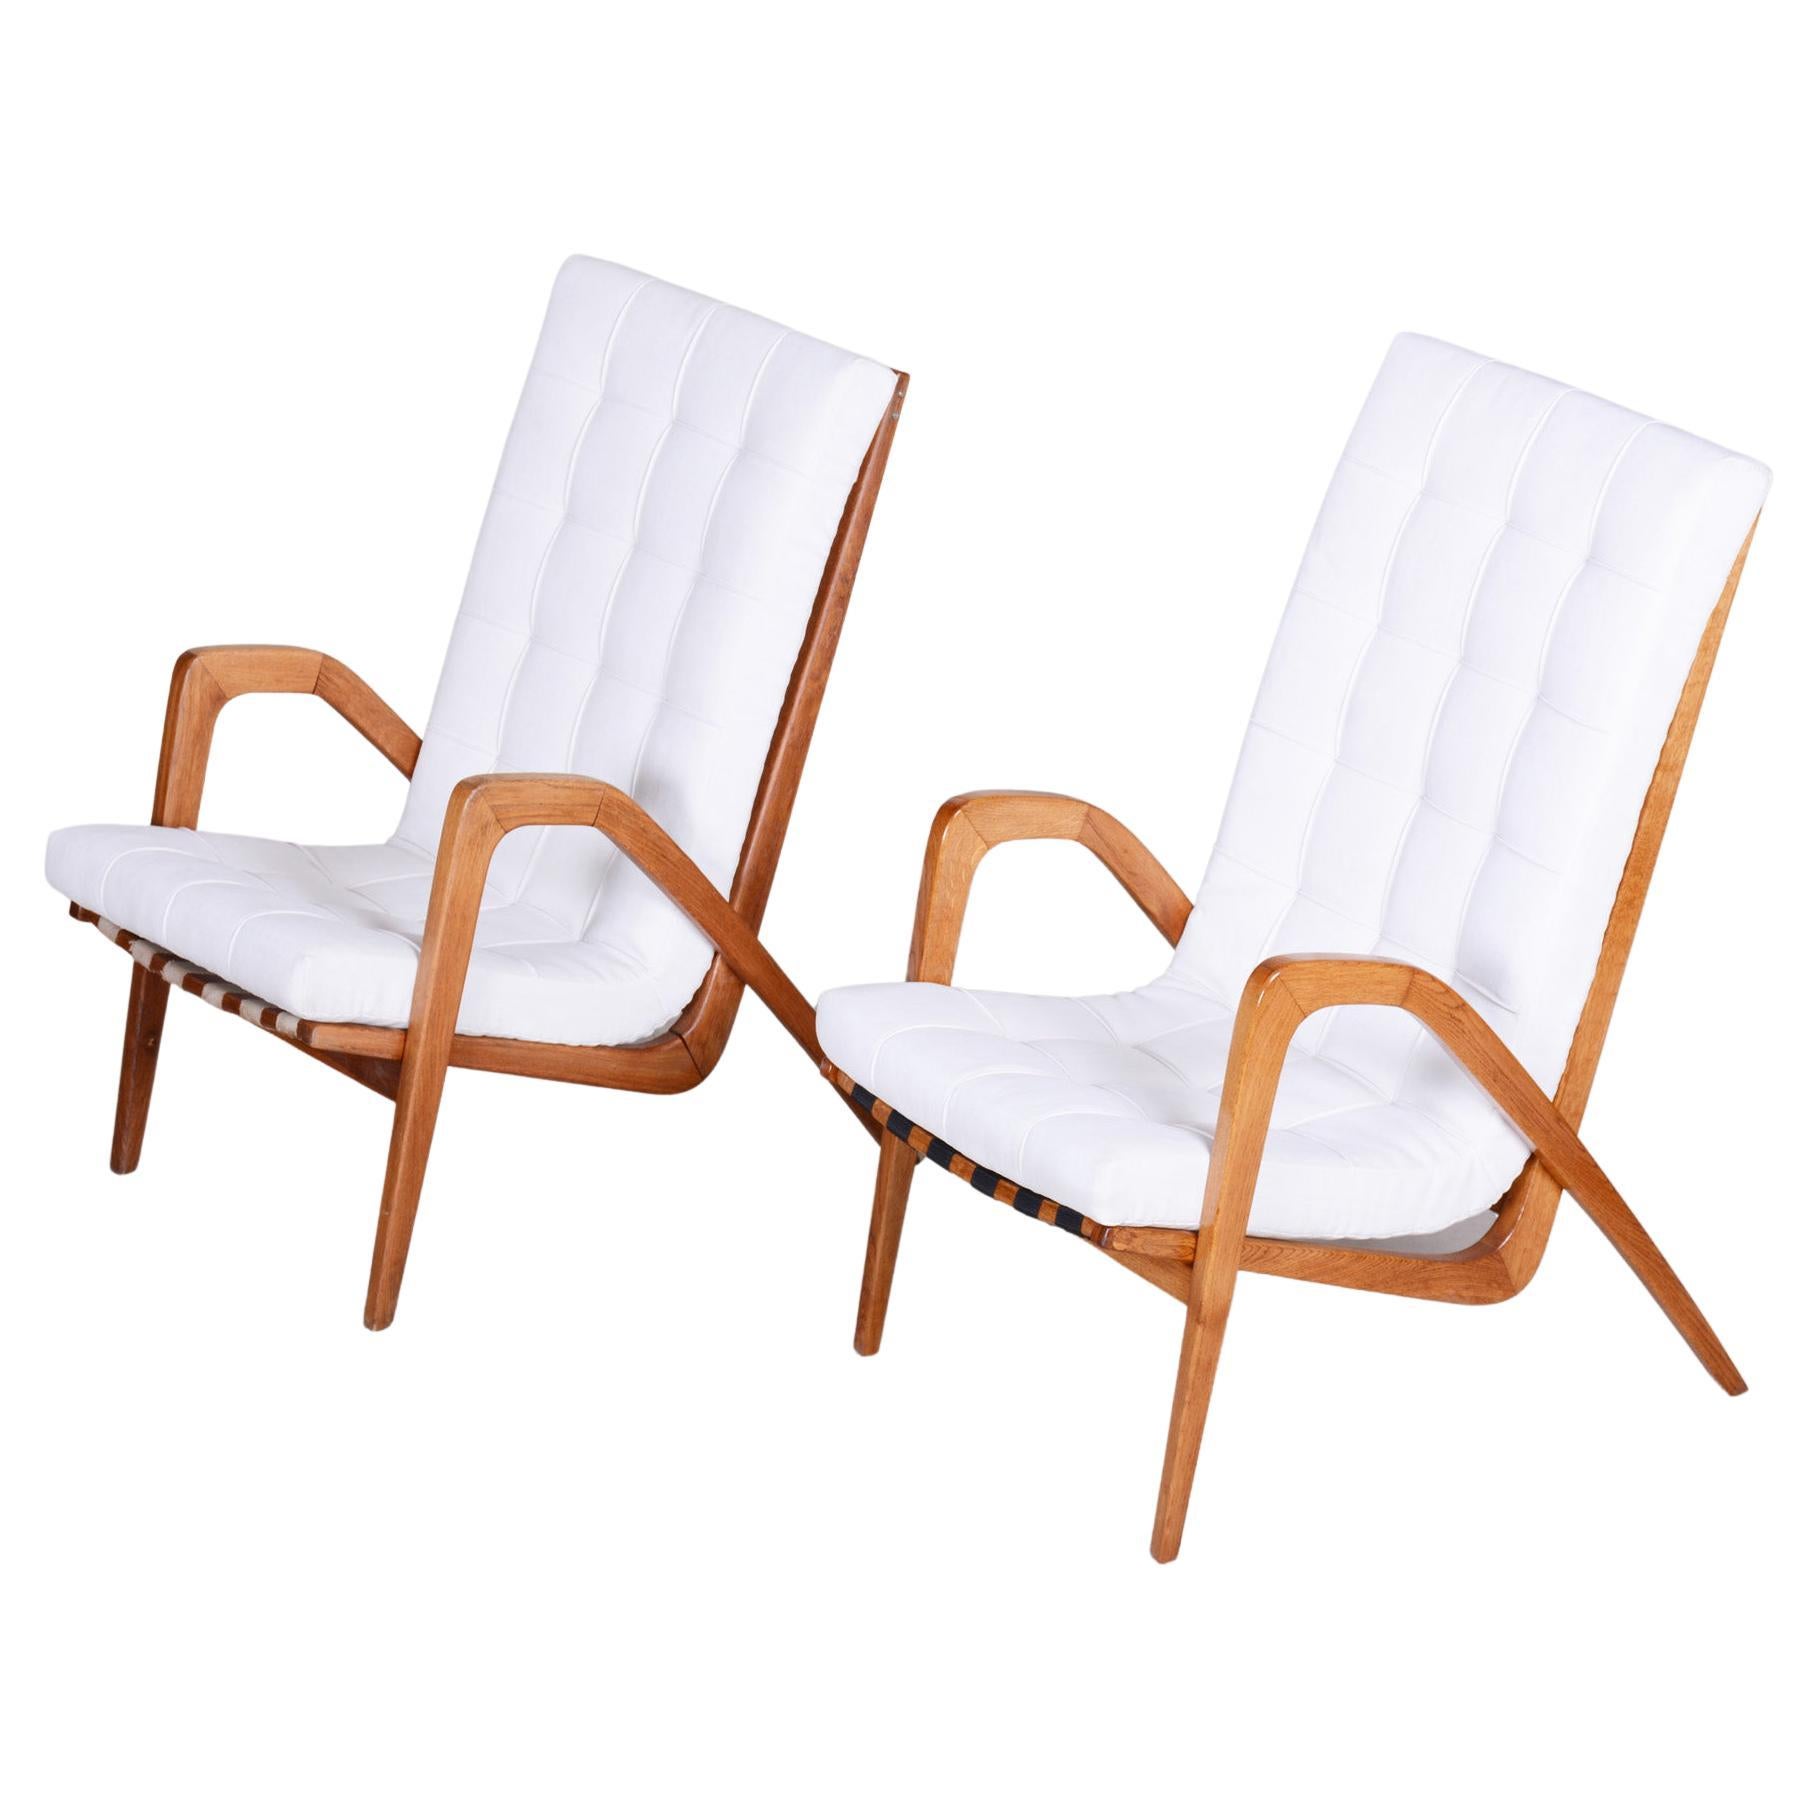 White Mid Century Armchairs Made in Czechia '50s, by Jan Vanek, Fully Restored For Sale